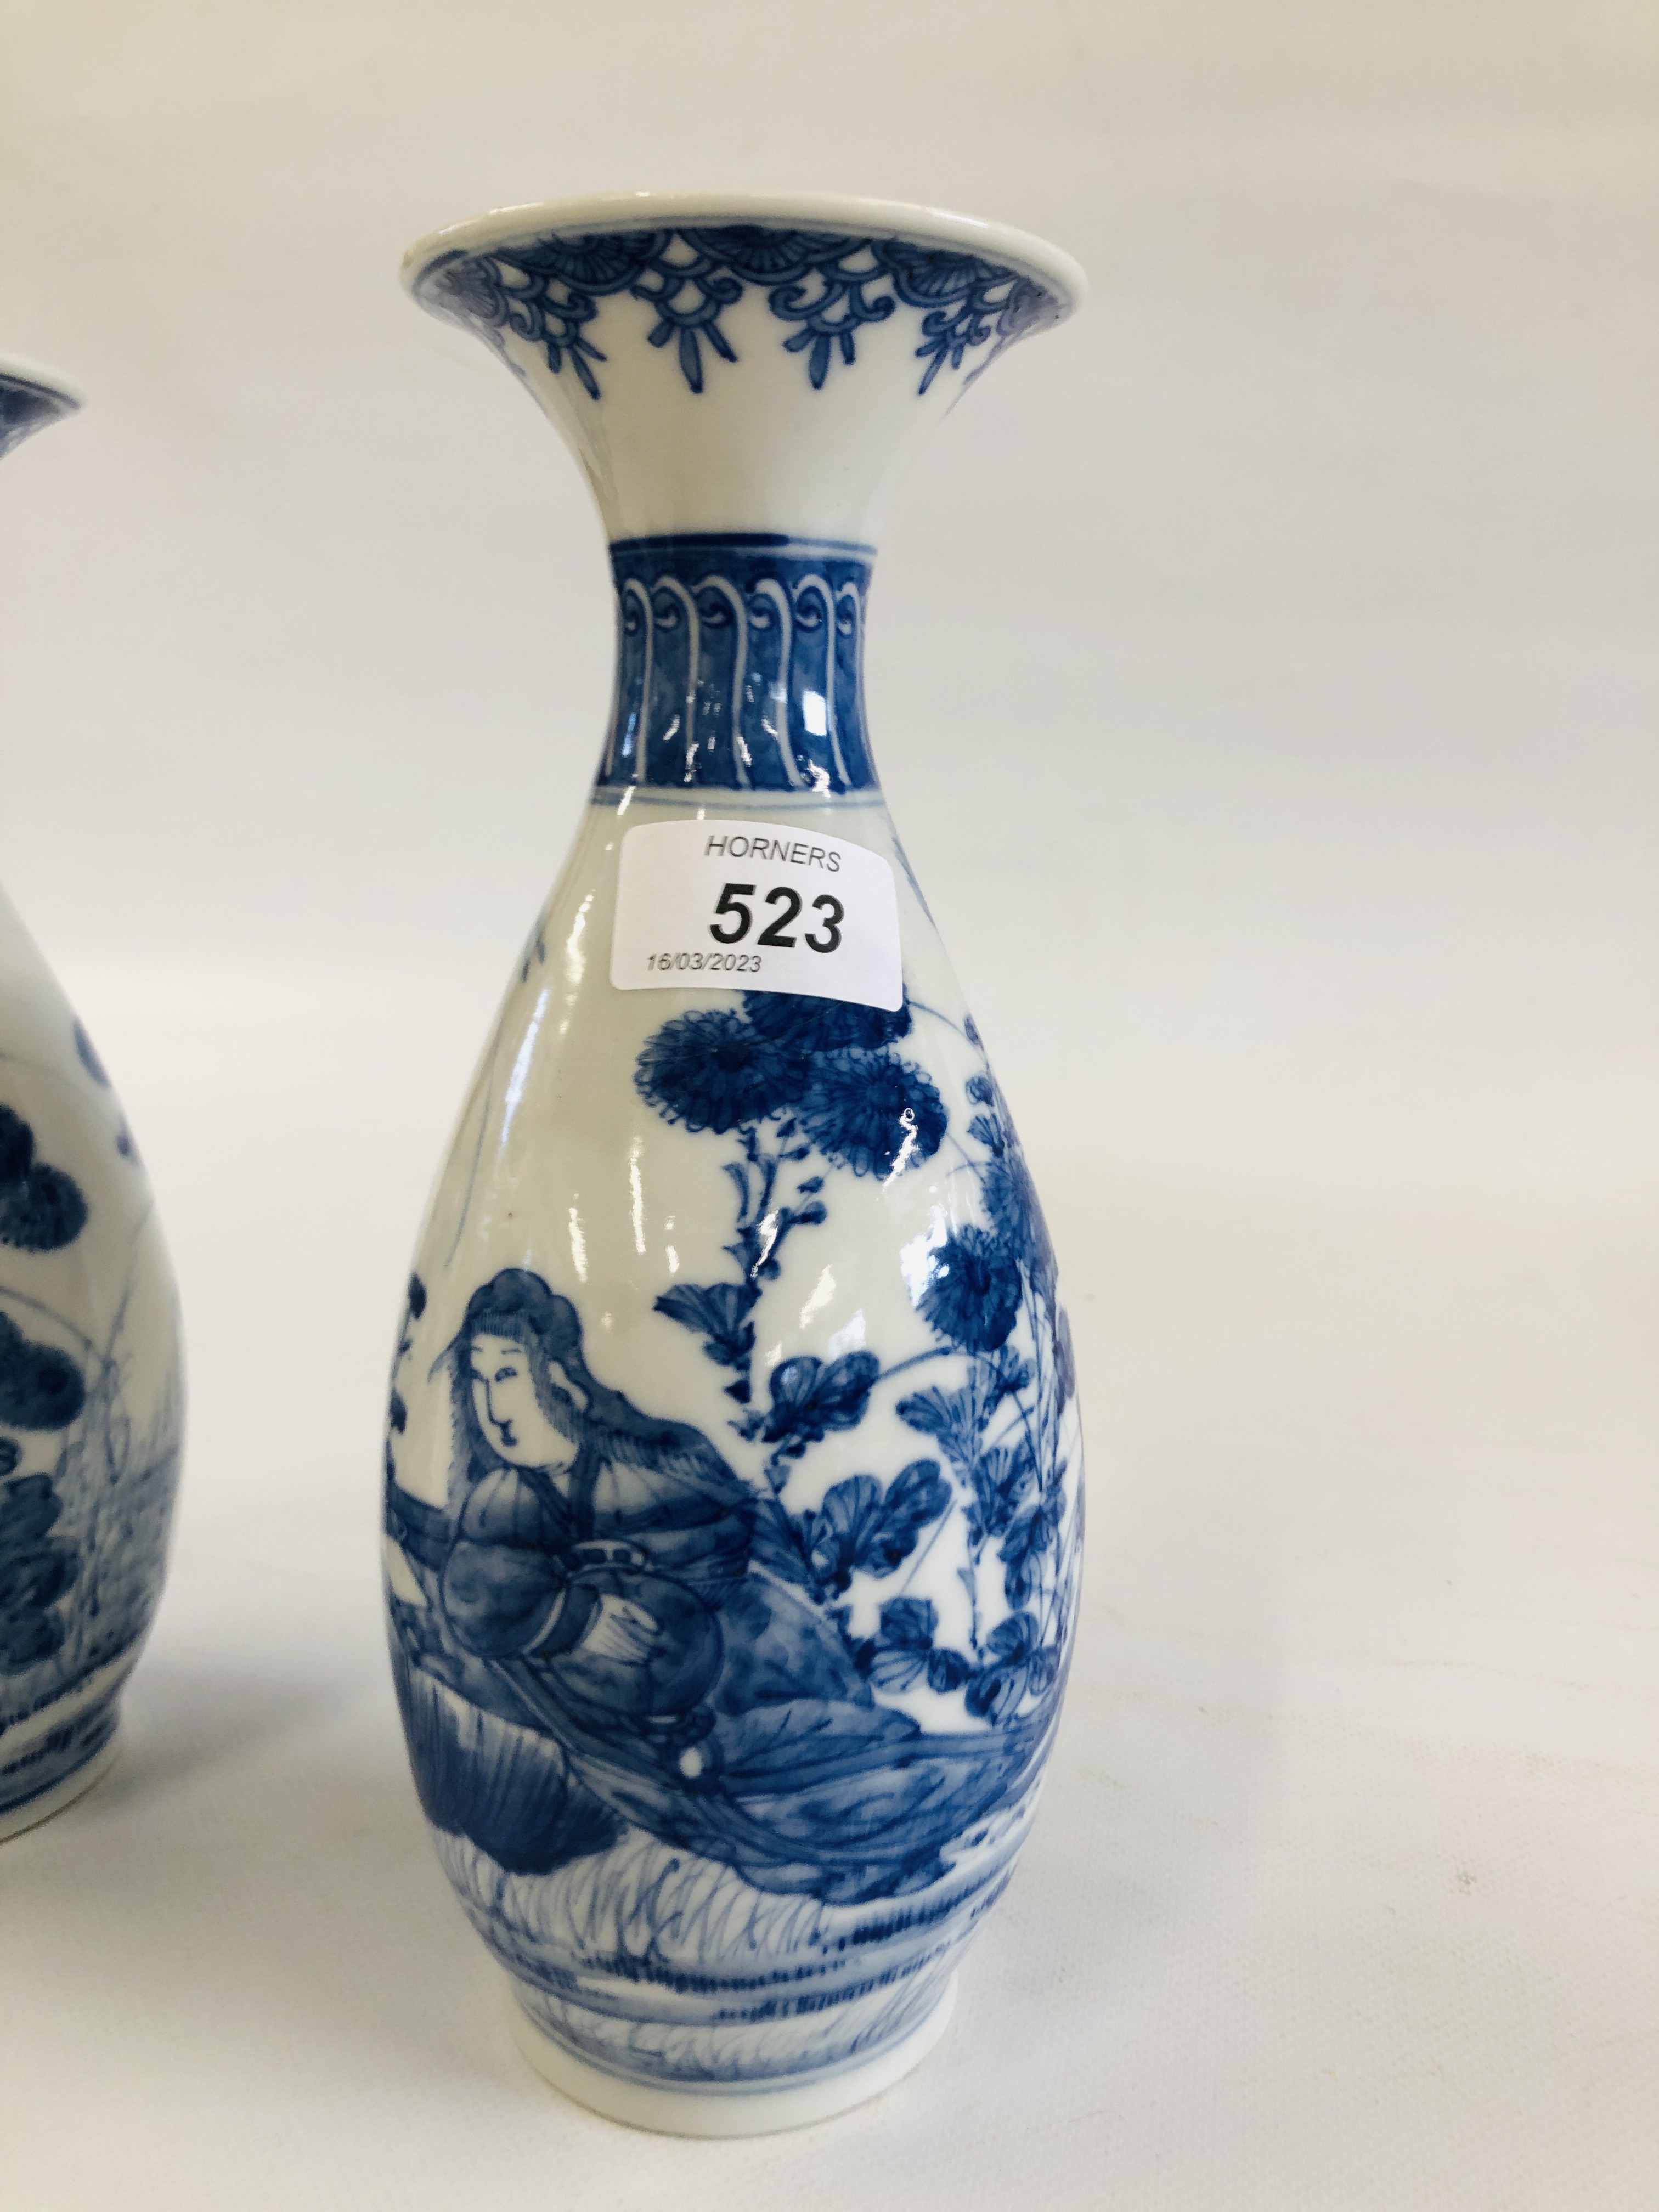 A PAIR OF DECORATIVE BLUE AND WHITE ORIENTAL VASES DEPICTING A PREGNANT WOMAN SEATED AMONGST THE - Image 4 of 13